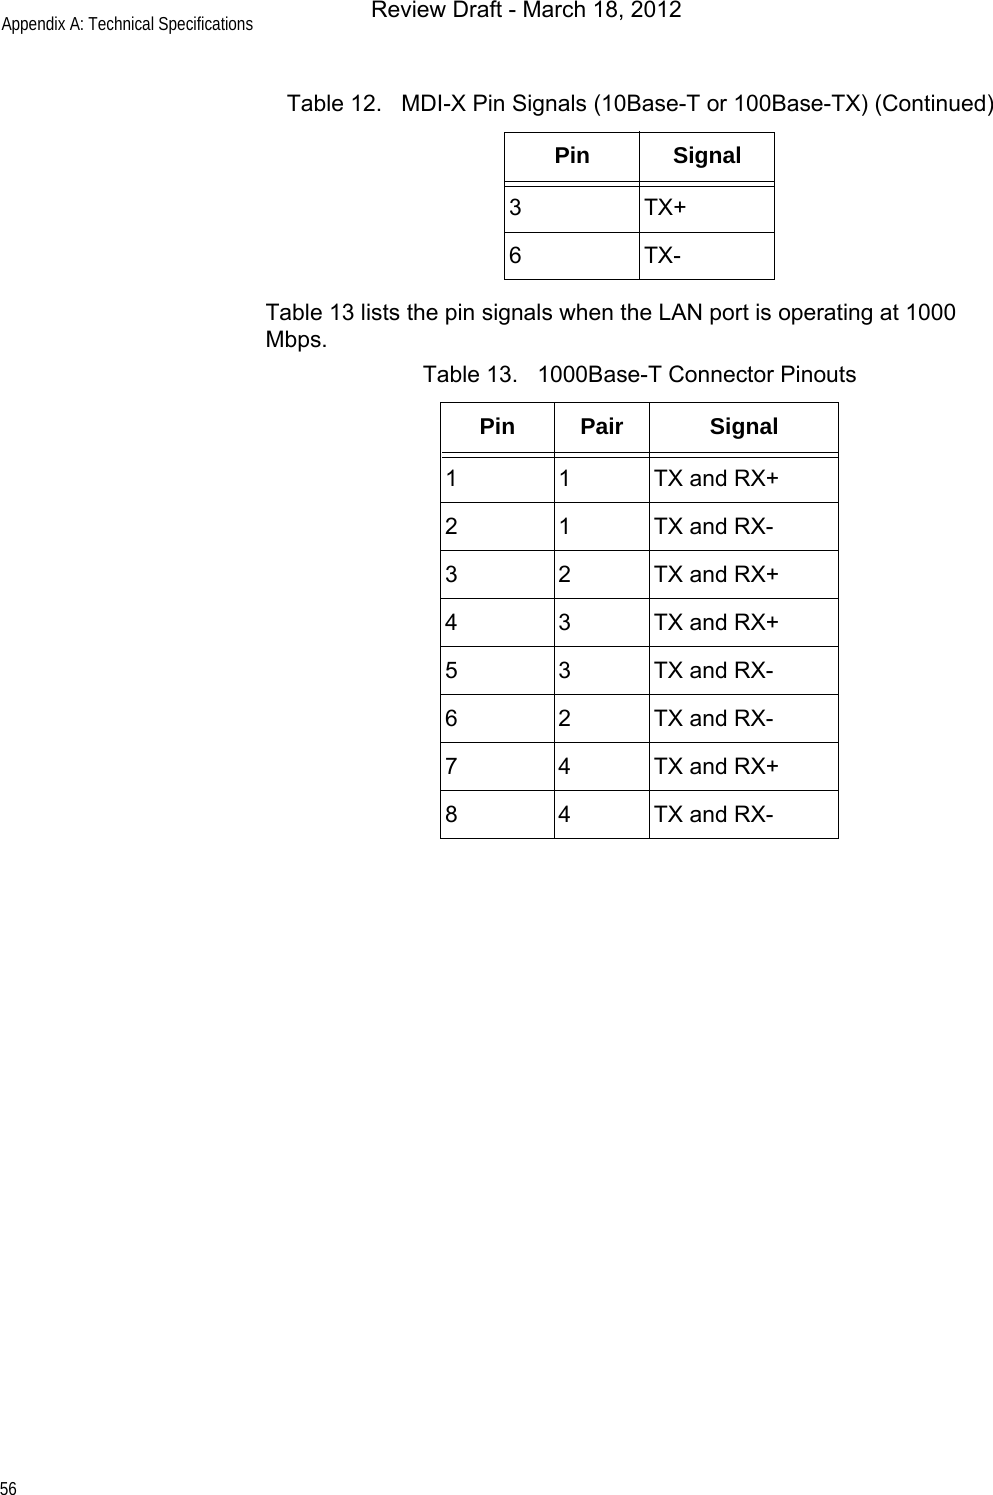 Appendix A: Technical Specifications56Table 13 lists the pin signals when the LAN port is operating at 1000 Mbps.3TX+6TX-Table 13.   1000Base-T Connector PinoutsPin Pair Signal1 1 TX and RX+2 1 TX and RX-3 2 TX and RX+4 3 TX and RX+5 3 TX and RX-6 2 TX and RX-7 4 TX and RX+8 4 TX and RX-Table 12.   MDI-X Pin Signals (10Base-T or 100Base-TX) (Continued)Pin SignalReview Draft - March 18, 2012